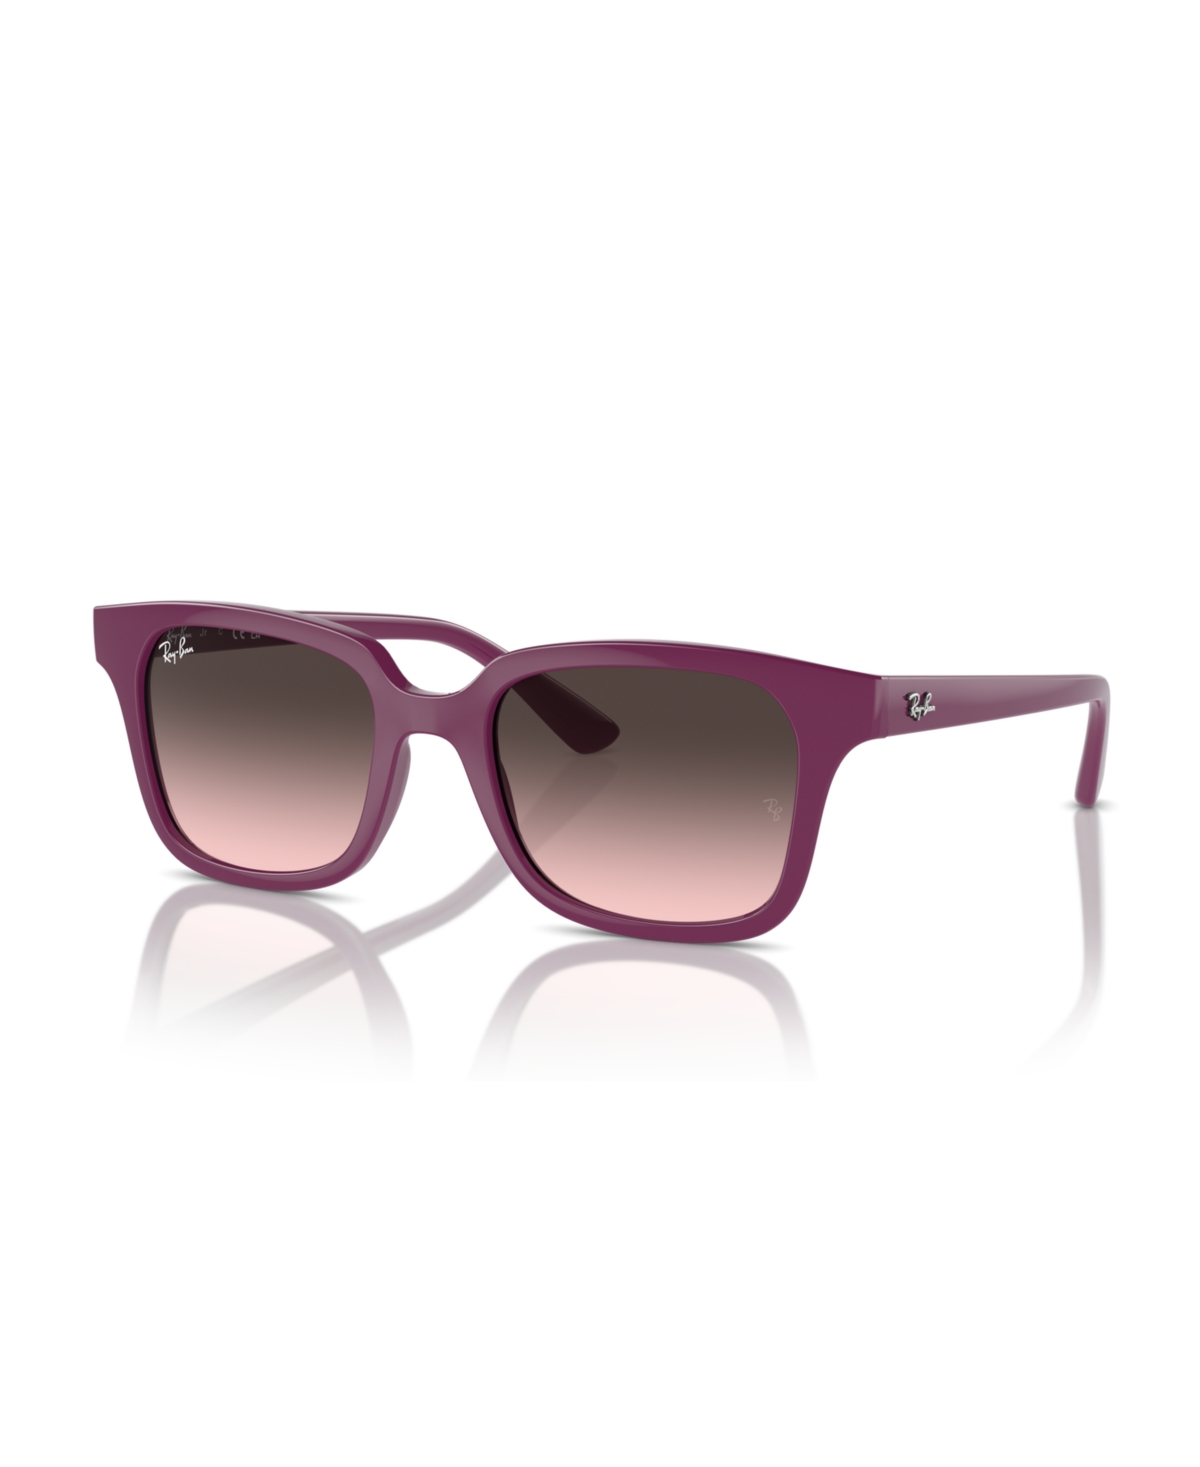 Ray-ban Jr Kid's Sunglasses, Rb9071s In Cherry